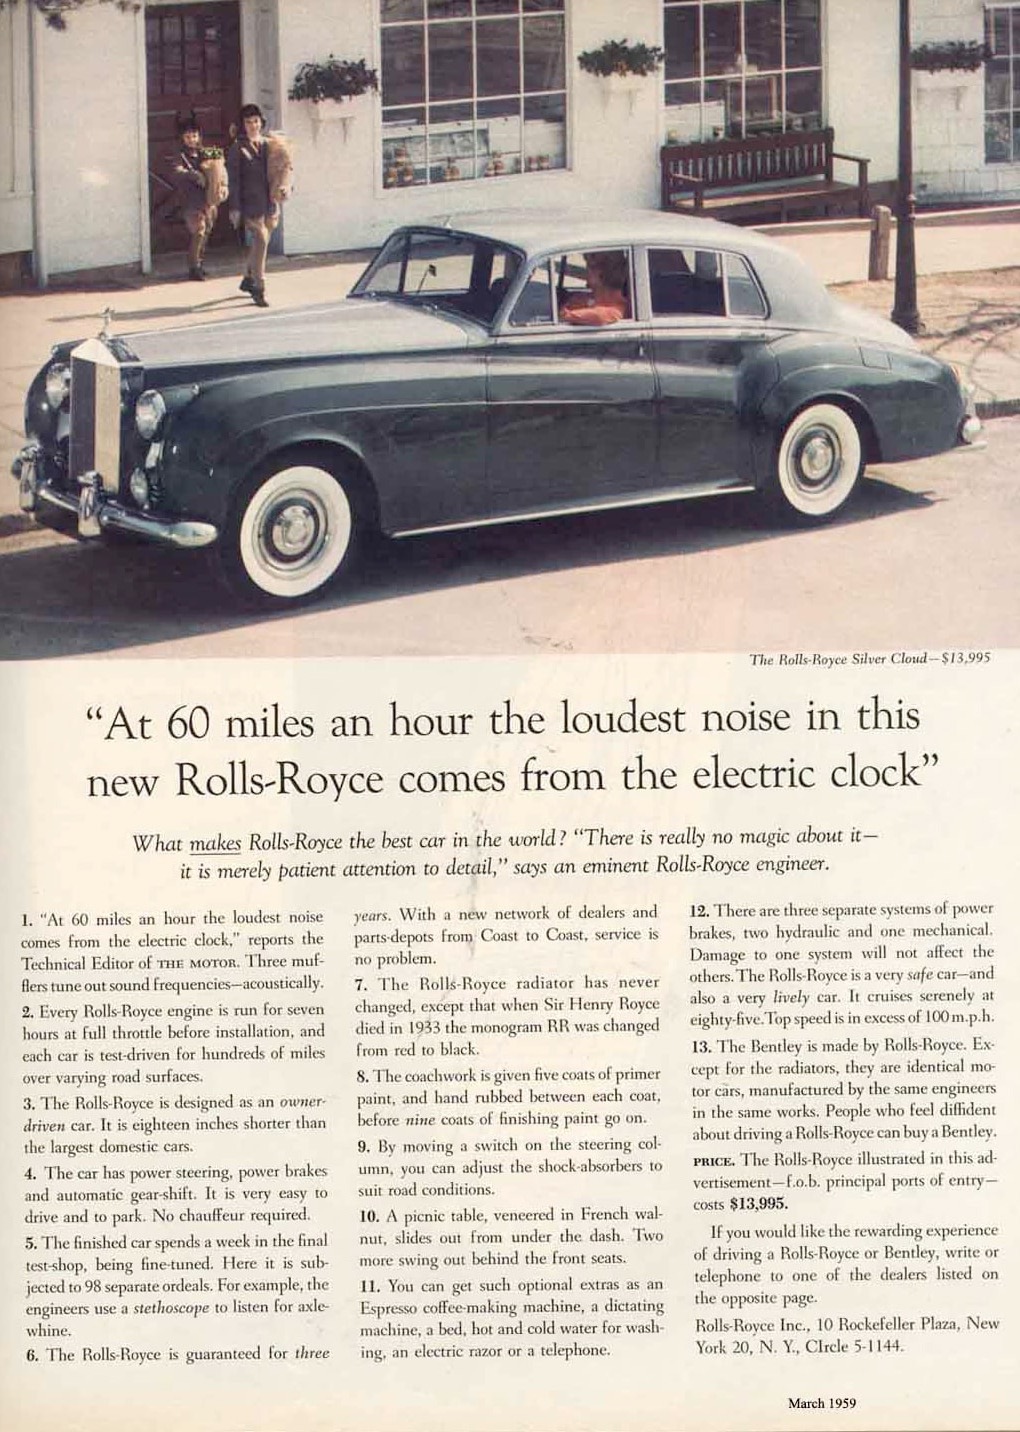 This Rolls Royce ad doesn't use marketing automation and yet is considered one of the best ads of all time.